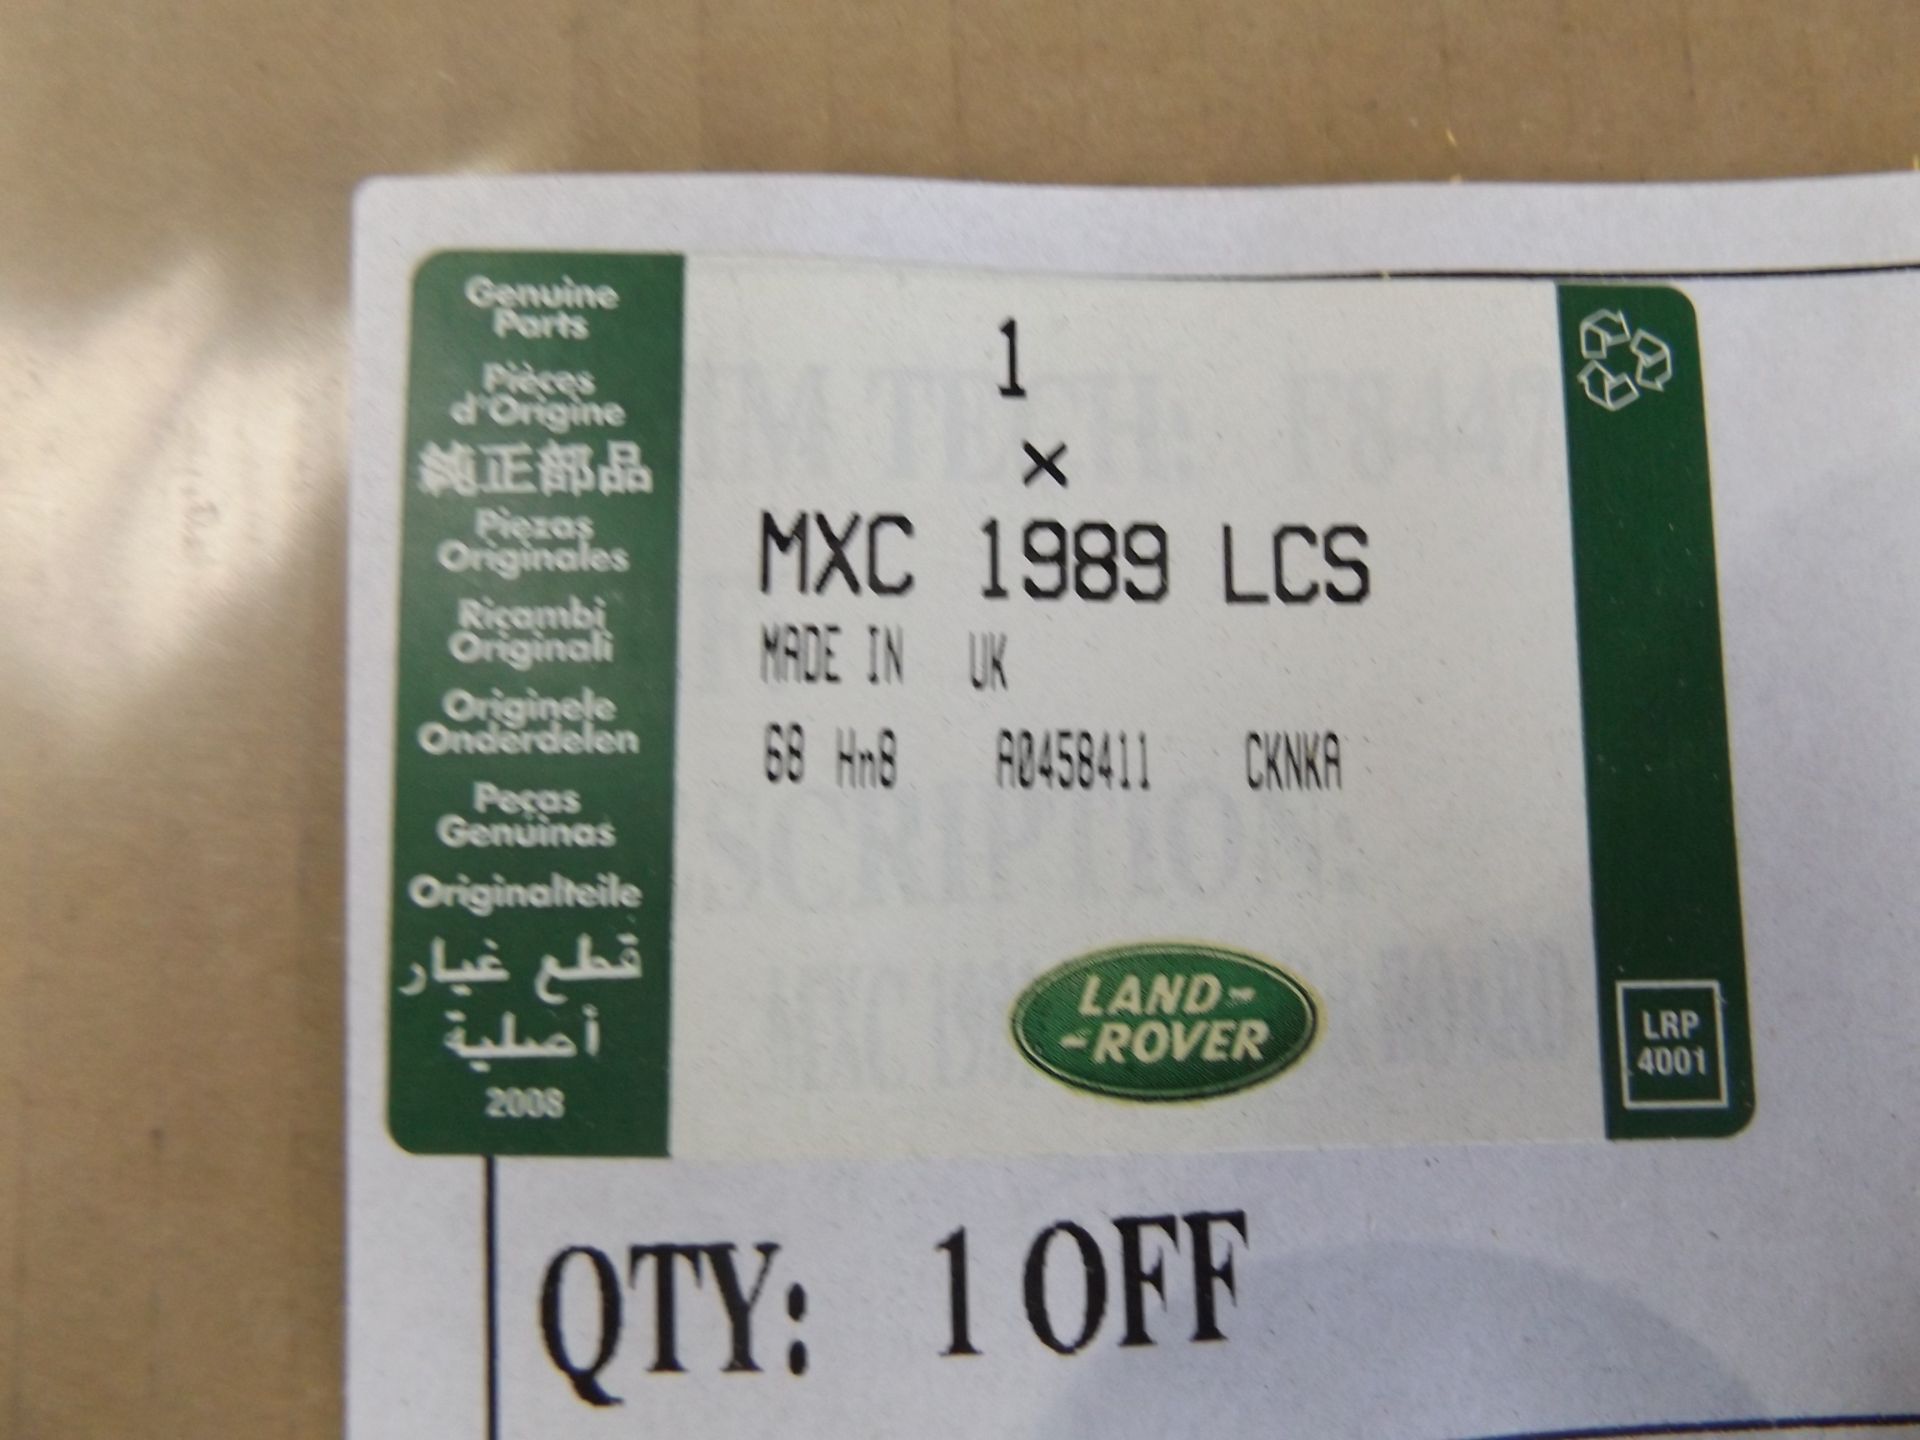 Land Rover Defender Tailgate Trim Card P/No MXC 1989 LCS - Image 3 of 3